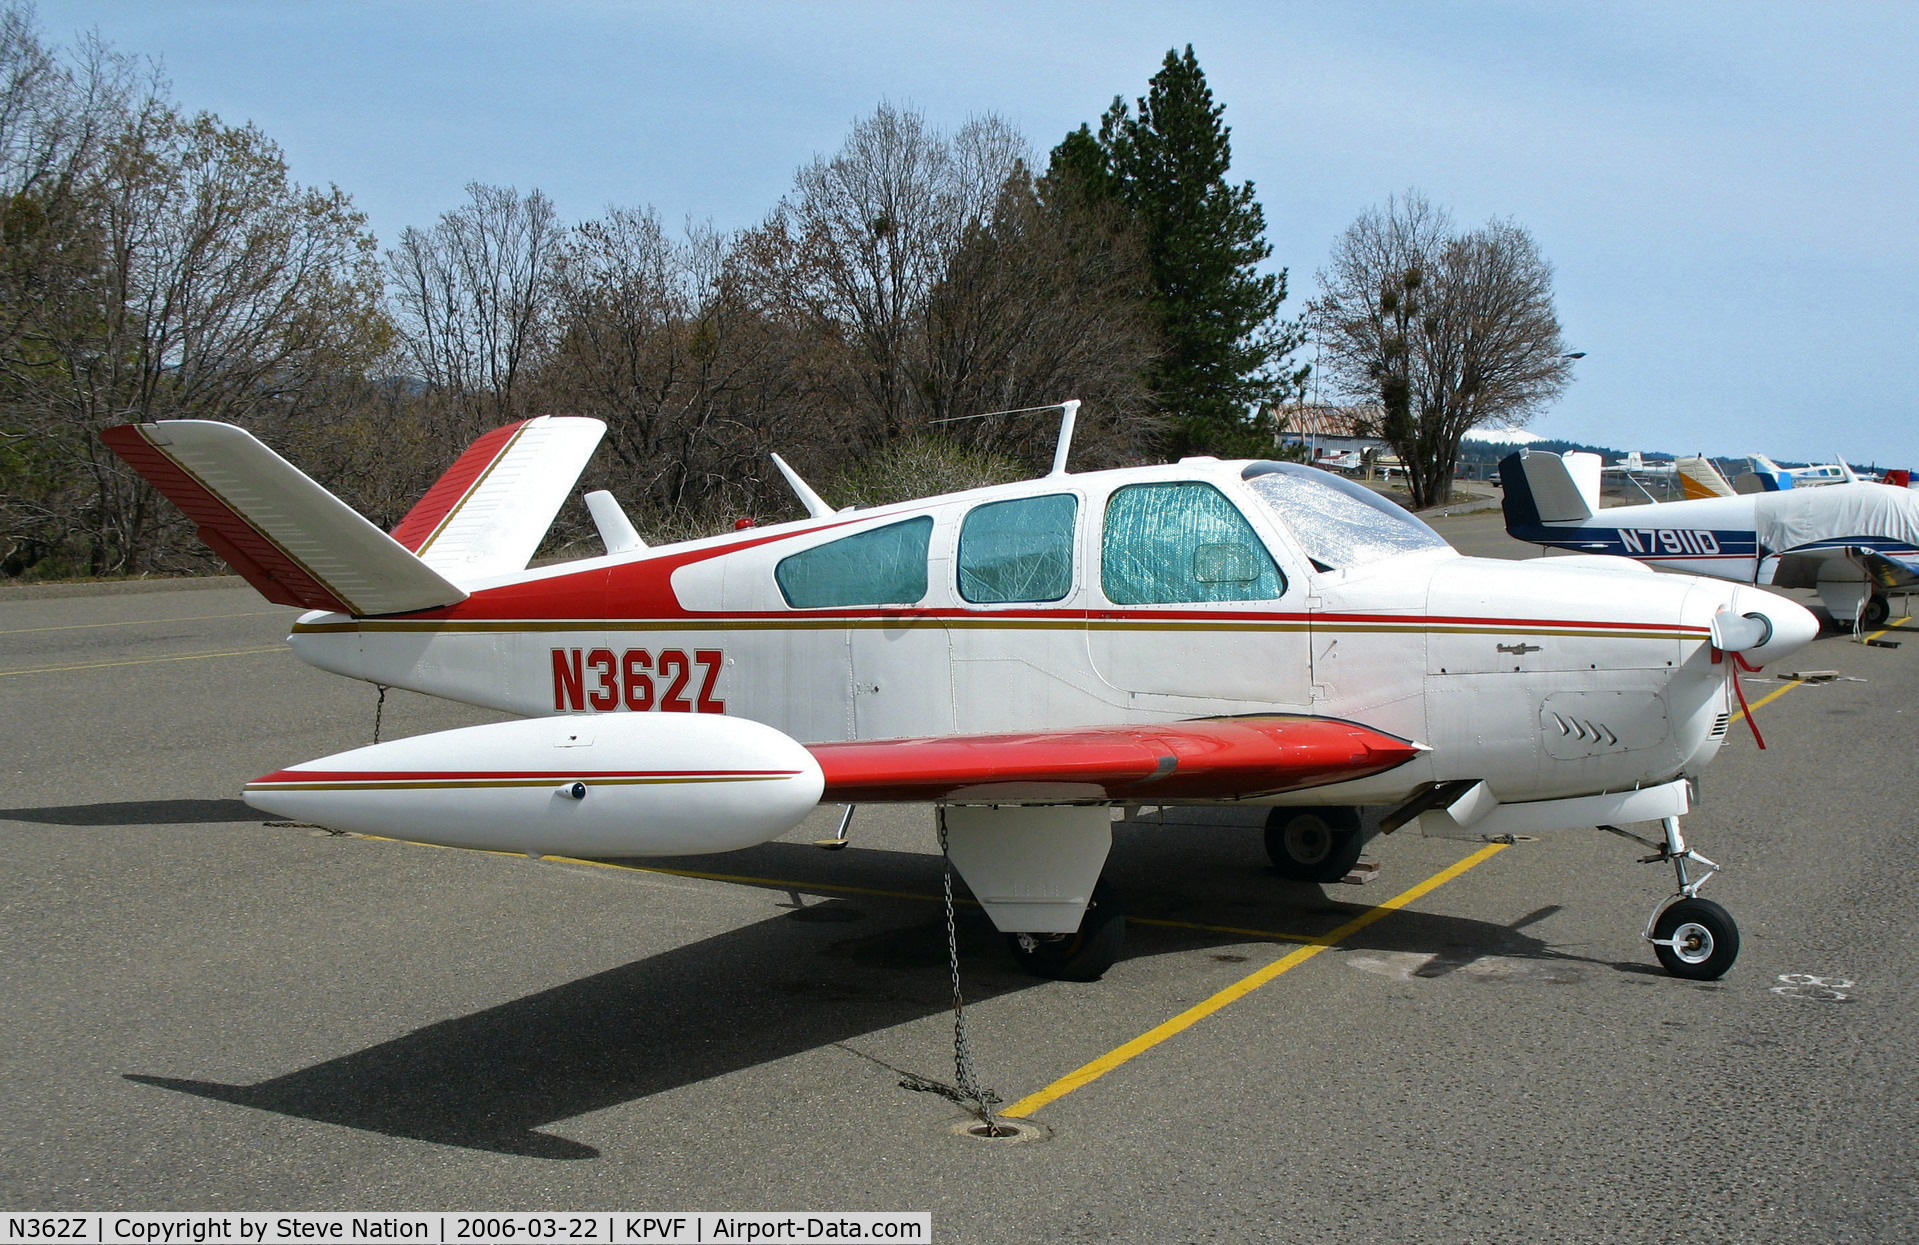 N362Z, 1960 Beech M35 Bonanza C/N D-6522, Locally-based 1960 Beech M35 with tip tanks @ Placerville, CA